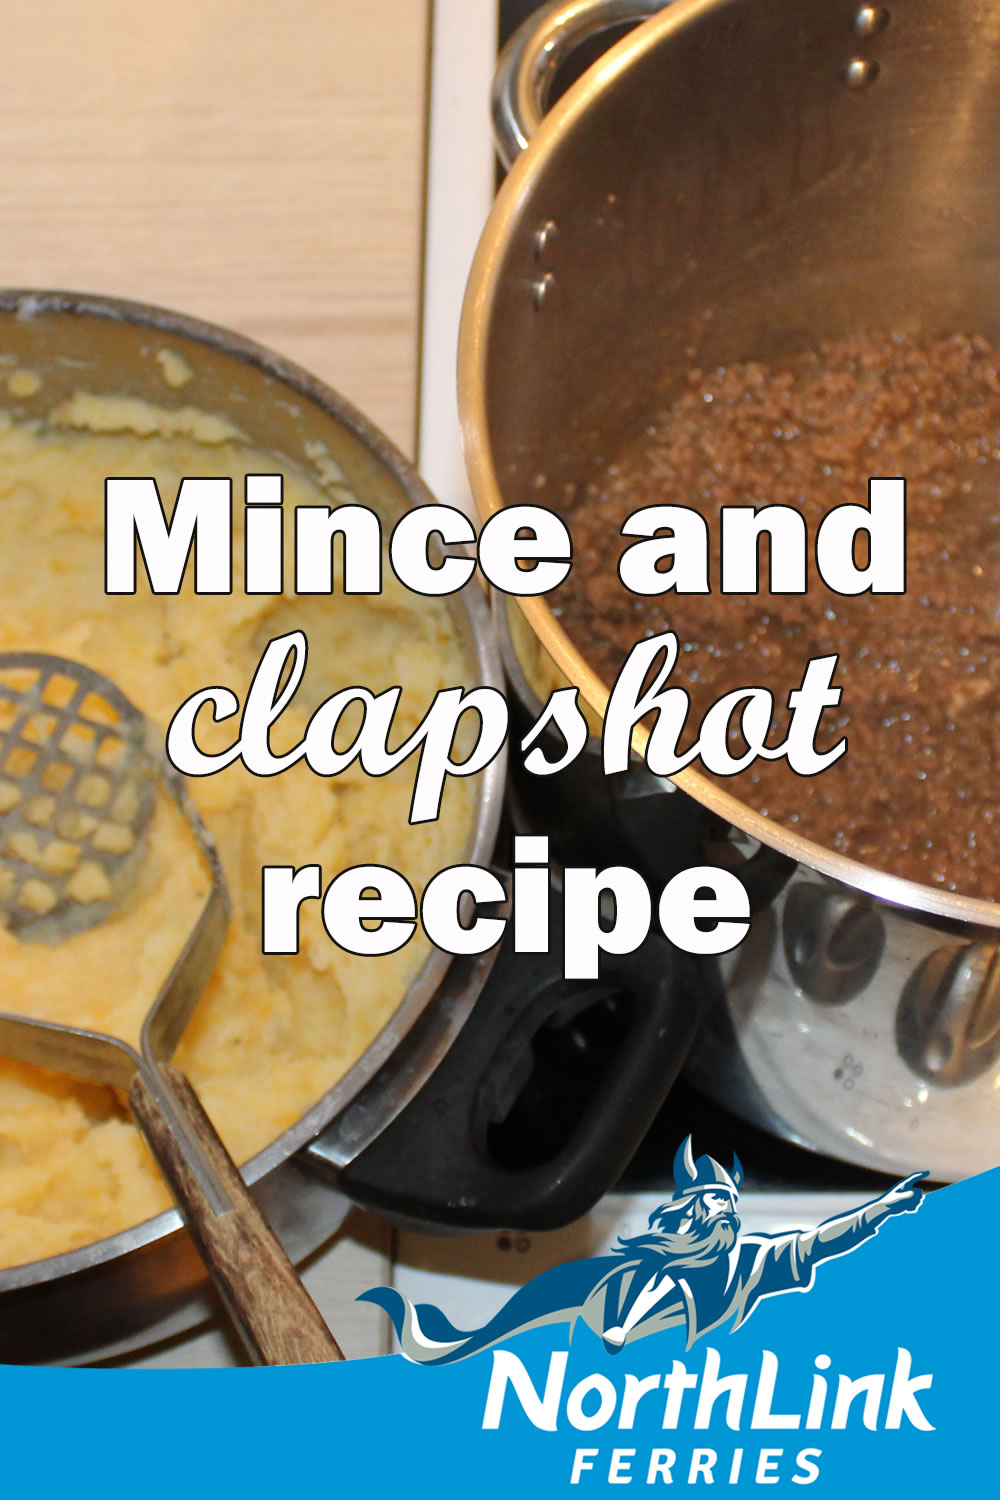 Mince and clapshot recipe